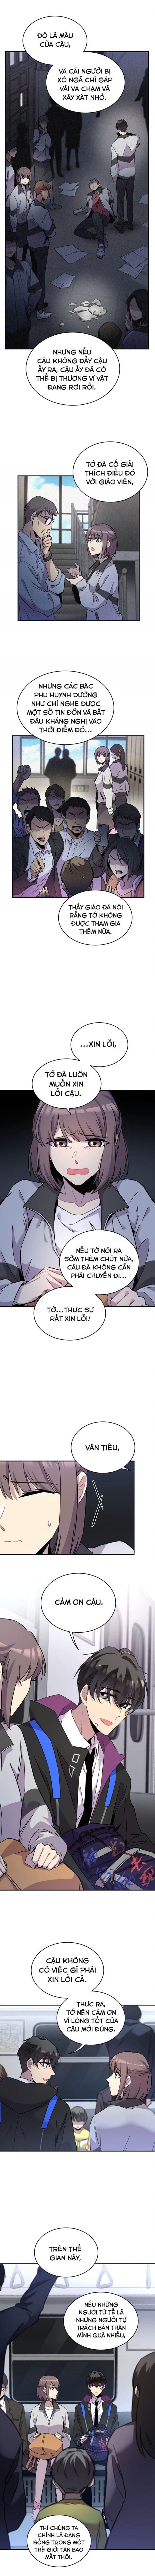 Anemone: Sống Hoặc Chết Chapter 1 - Trang 18